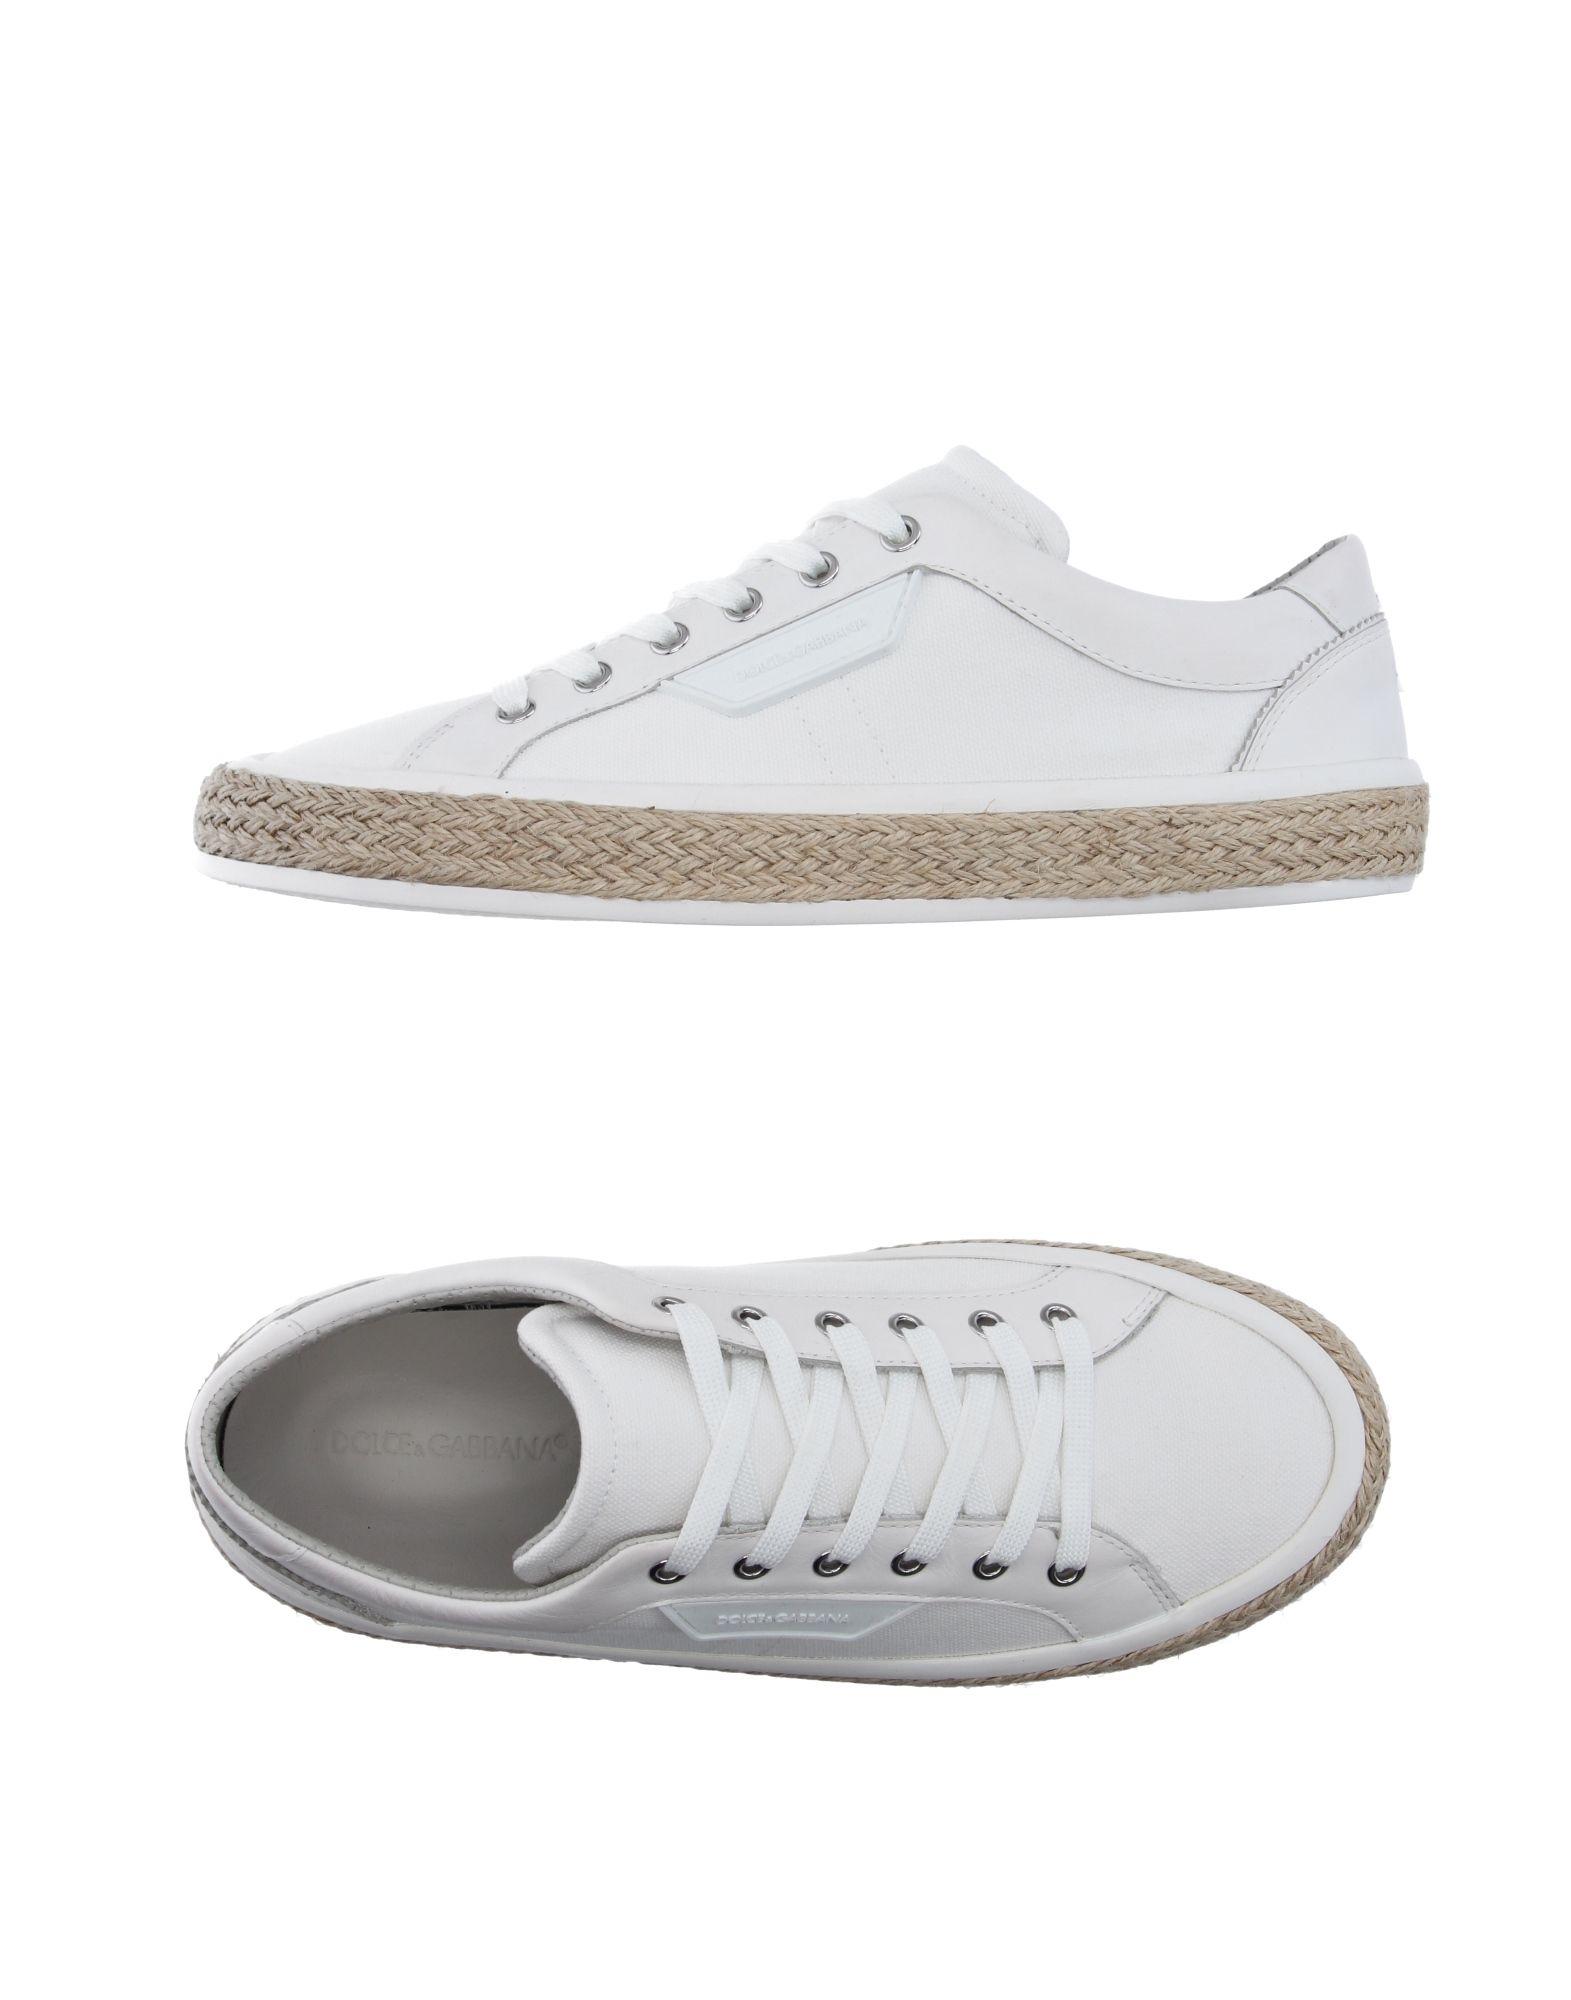 Lyst - Dolce & gabbana Low-tops & Sneakers in White for Men